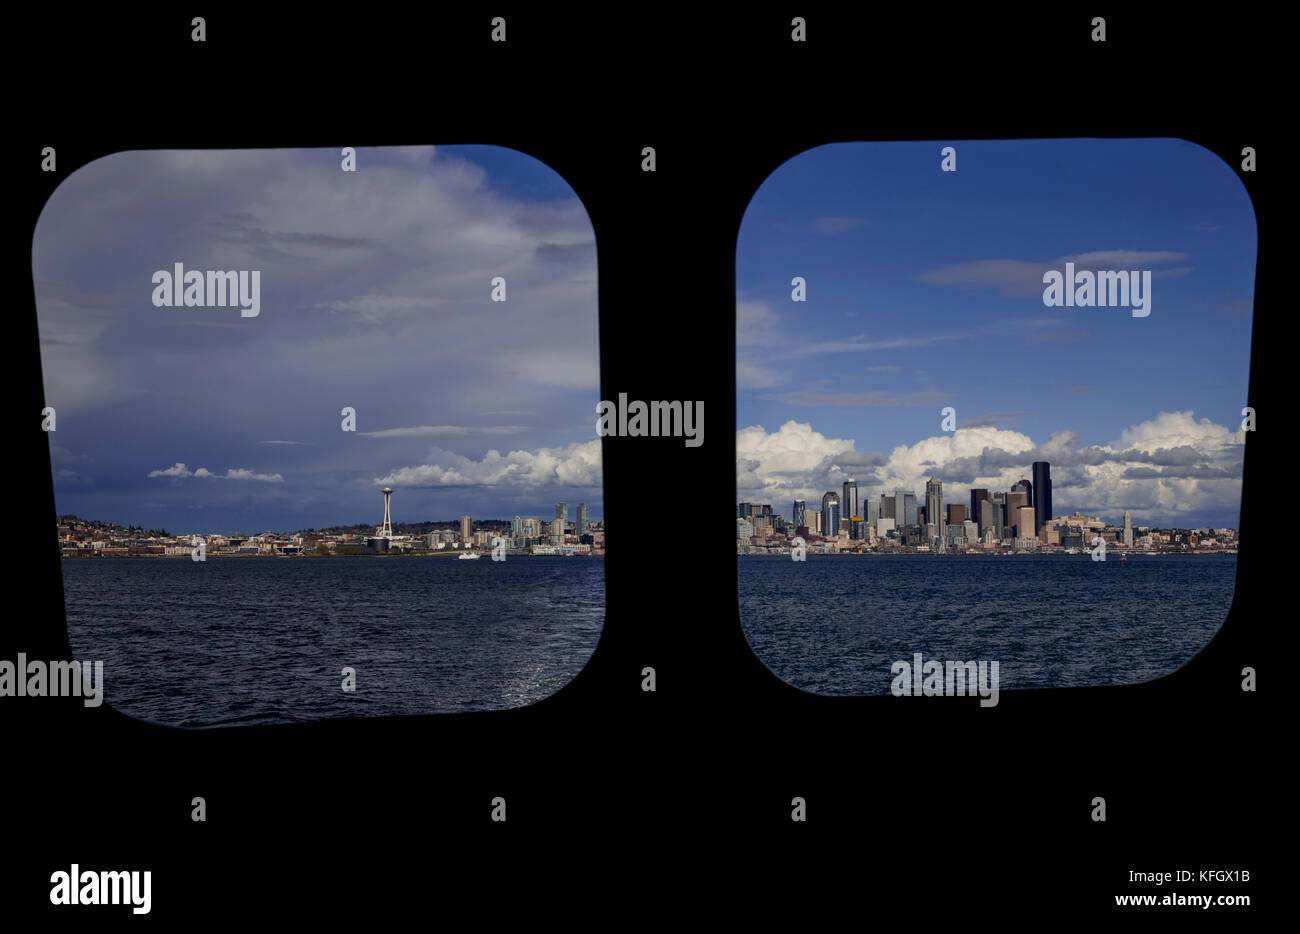 WA14053-00...WASHINGTON - The Seattle skyline viewed  through windows of a ferry bouat in the Puget Sound. Stock Photo